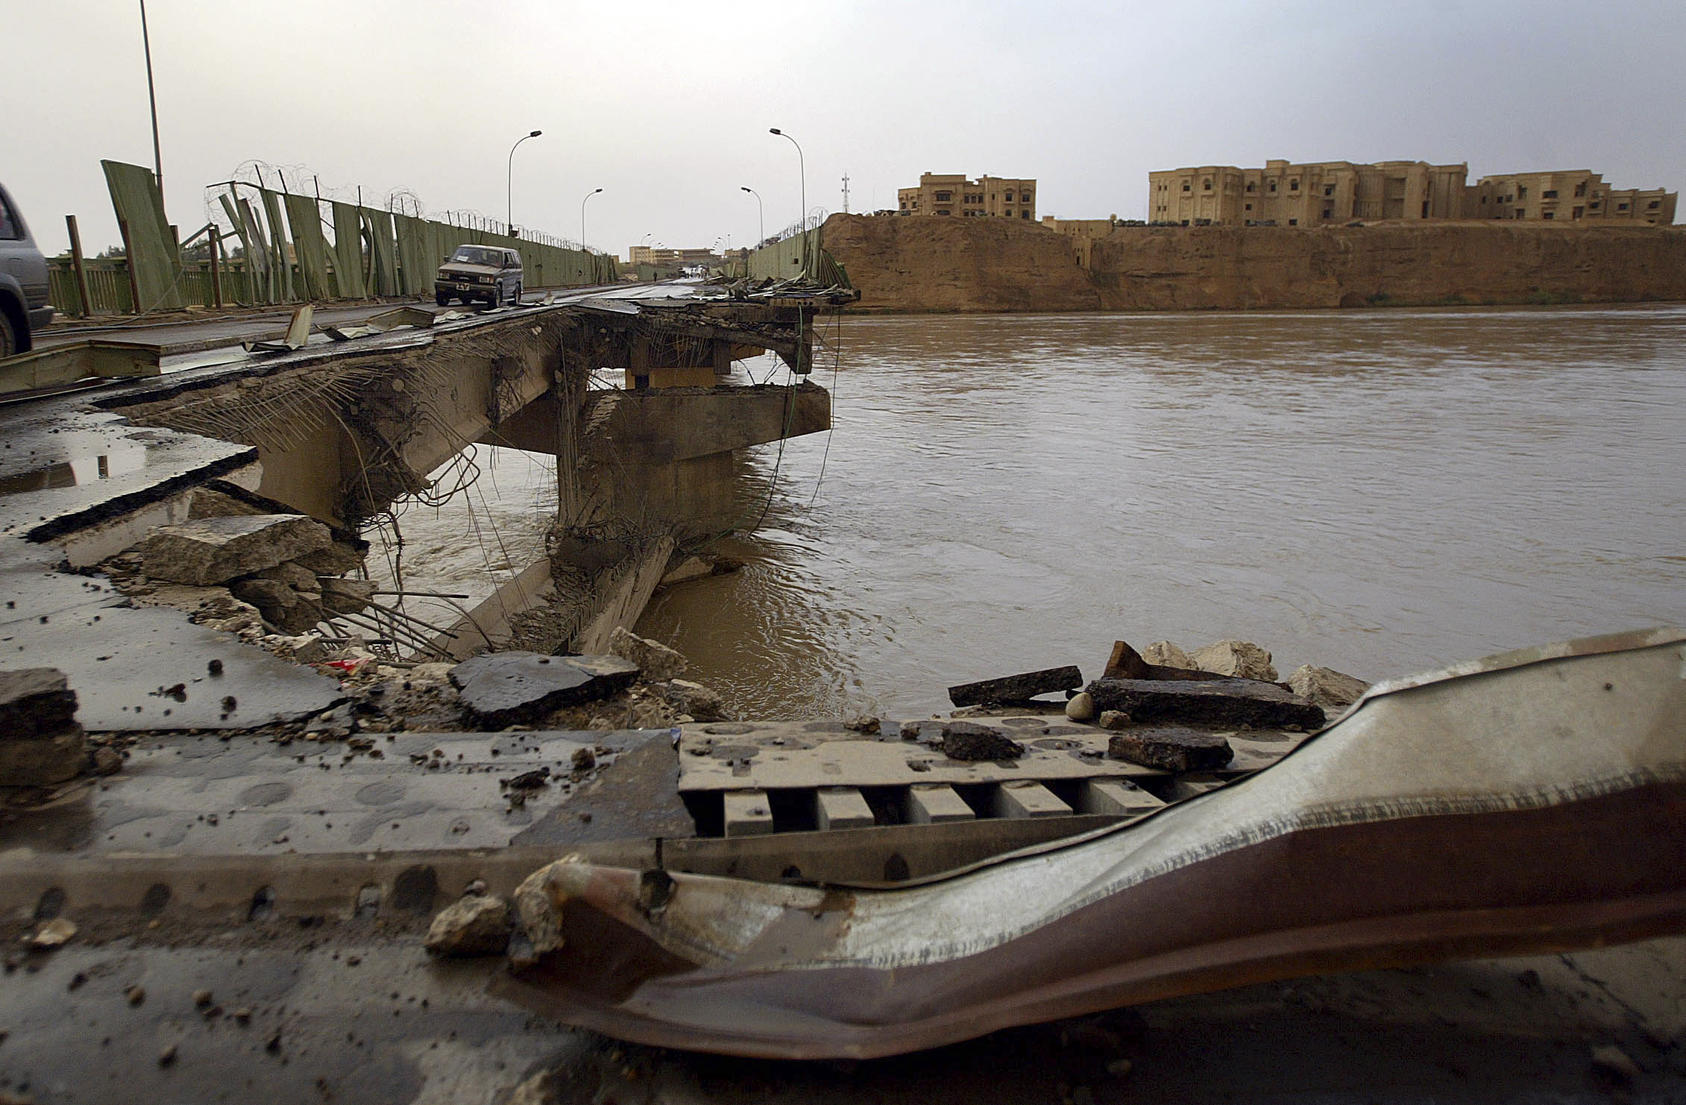 A bridge bombed by American forces, and a palace of Saddam Hussein's, right, in Tikrit, Iraq, April 15, 2003. Tikrit fell to ISIS insurgents on June 11, 2014, clearing a path for them to march on to Baiji, home to one of Iraq’s foremost oil-refining operations. After taking the city in less than a day, militants continued the fight just south, in Samarra. (Chang W. Lee/The New York Times) 